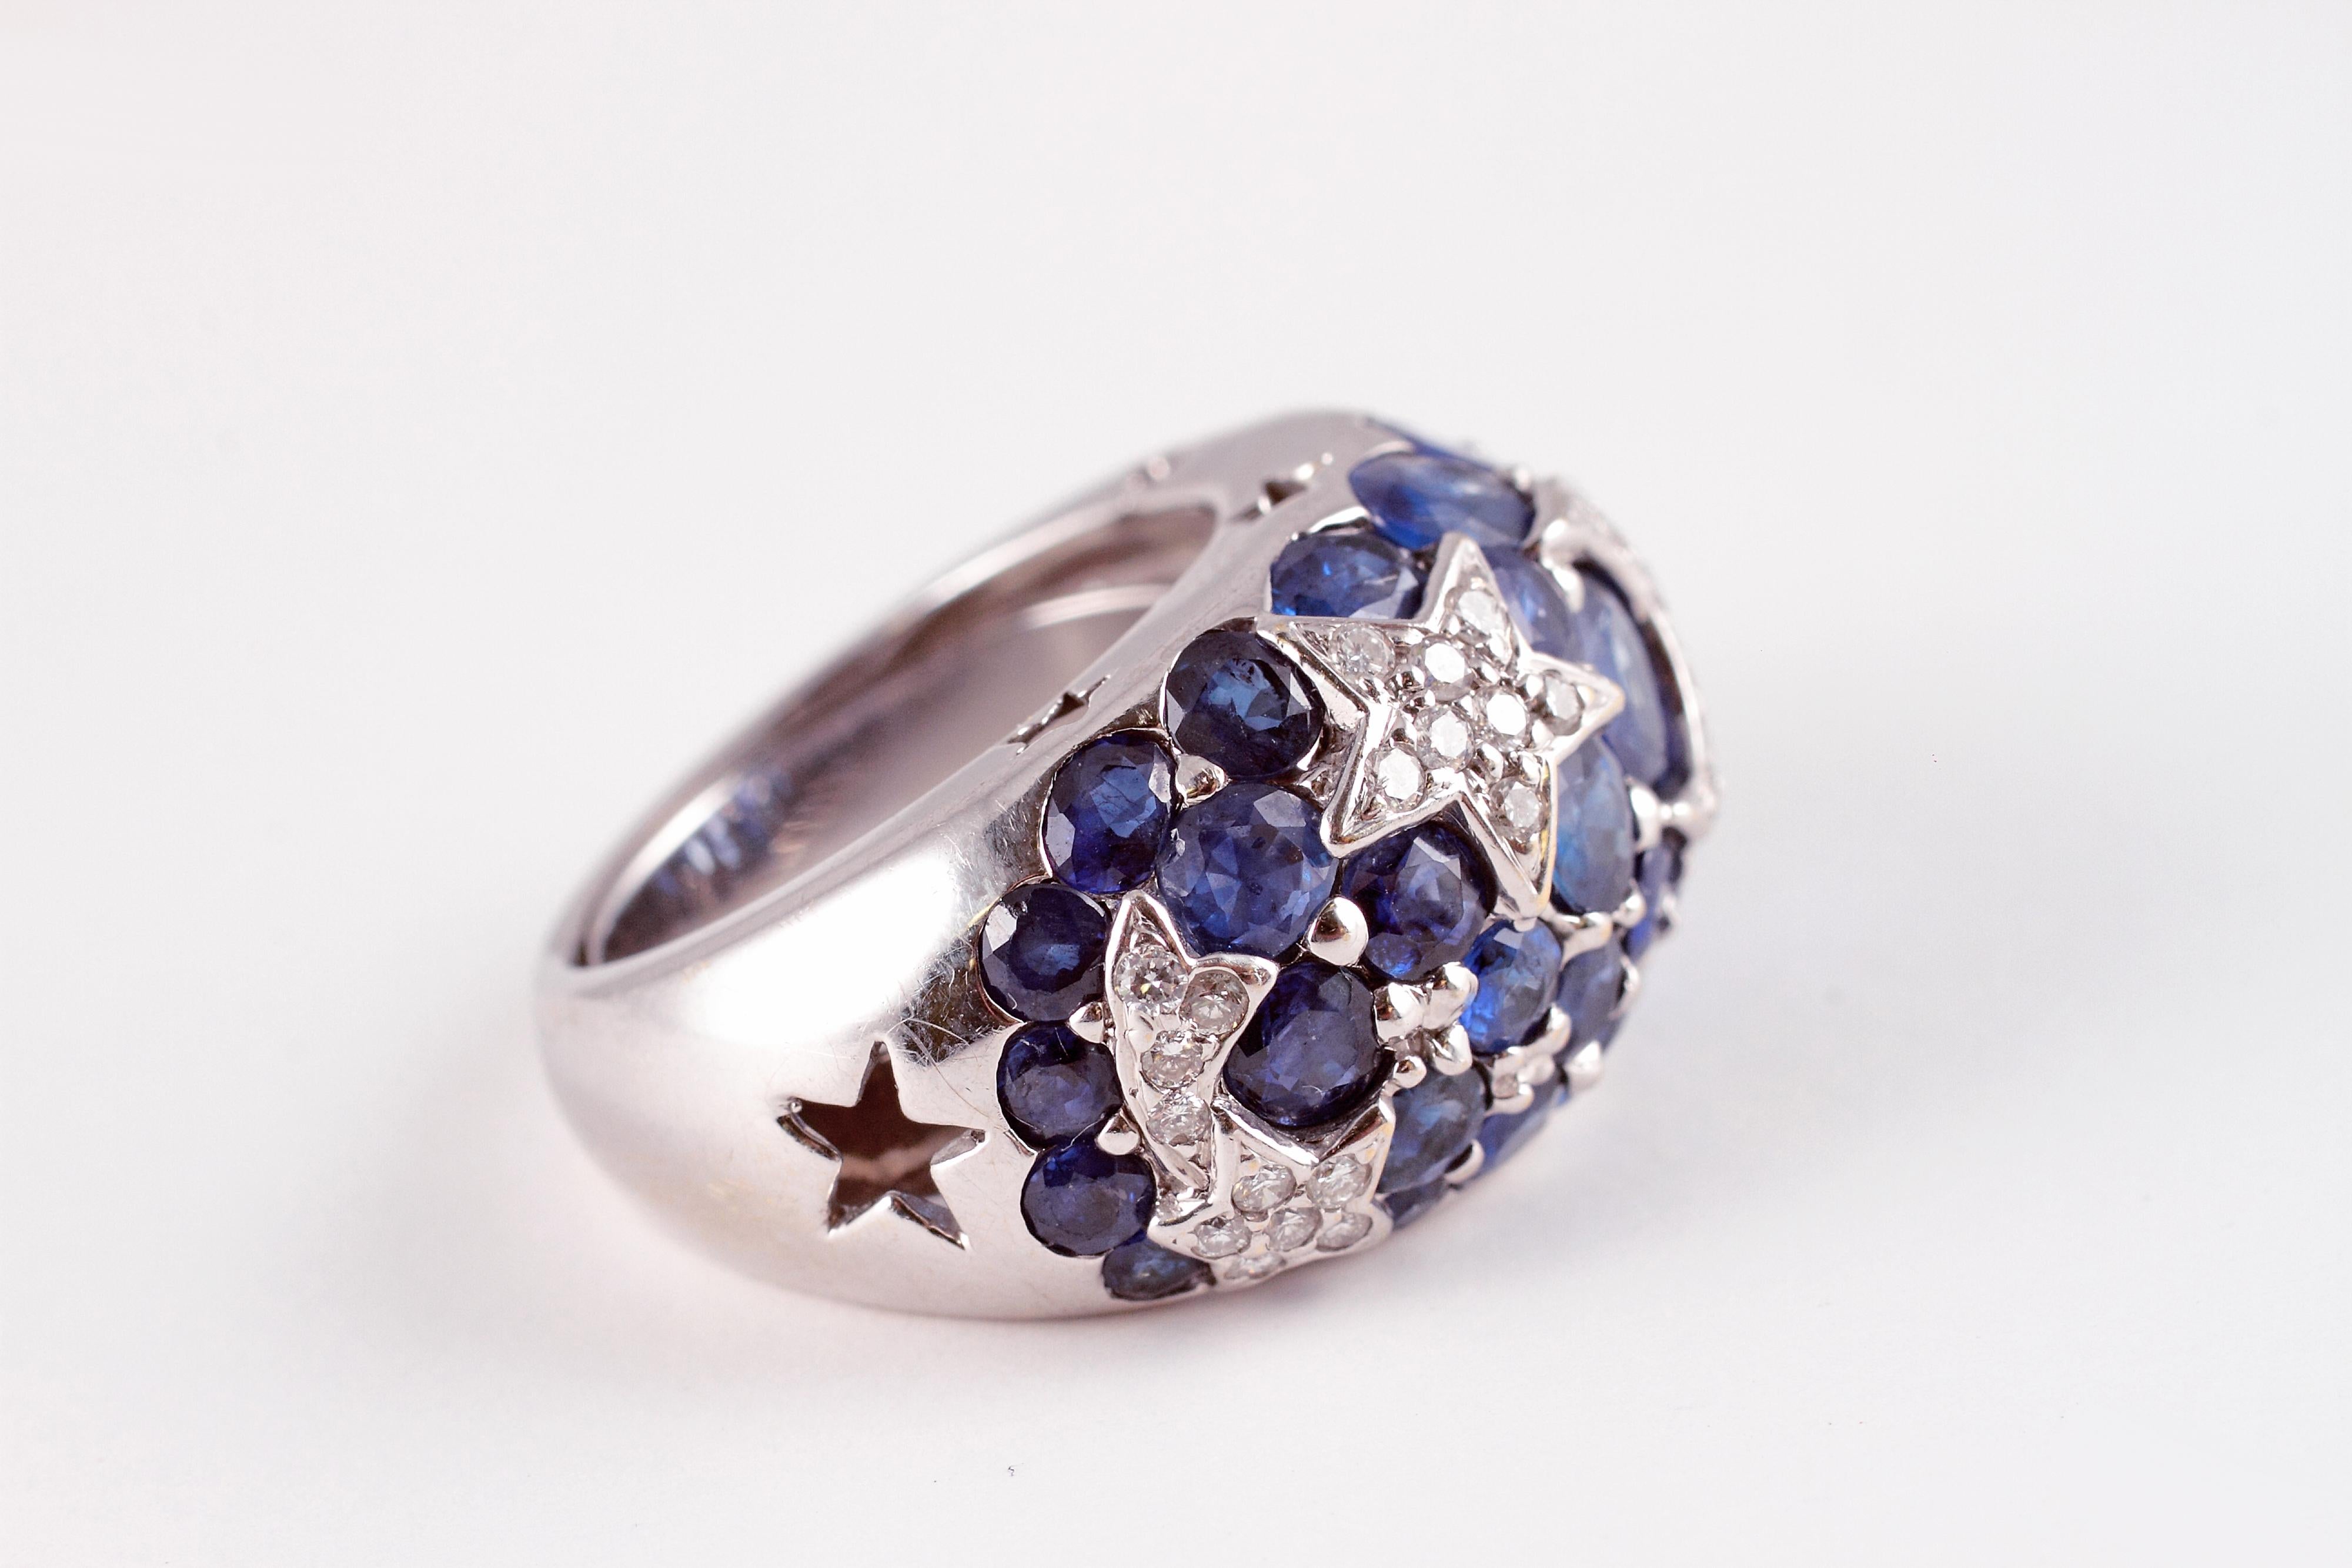 From a Florida estate, this stunning white gold, blue sapphire and diamond ring was purchased from A. B. Levy of Palm Beach and features 0.40 carats of diamonds in the shapes of stars and a crescent moon and over 6.00 carats of blue sapphires.   The